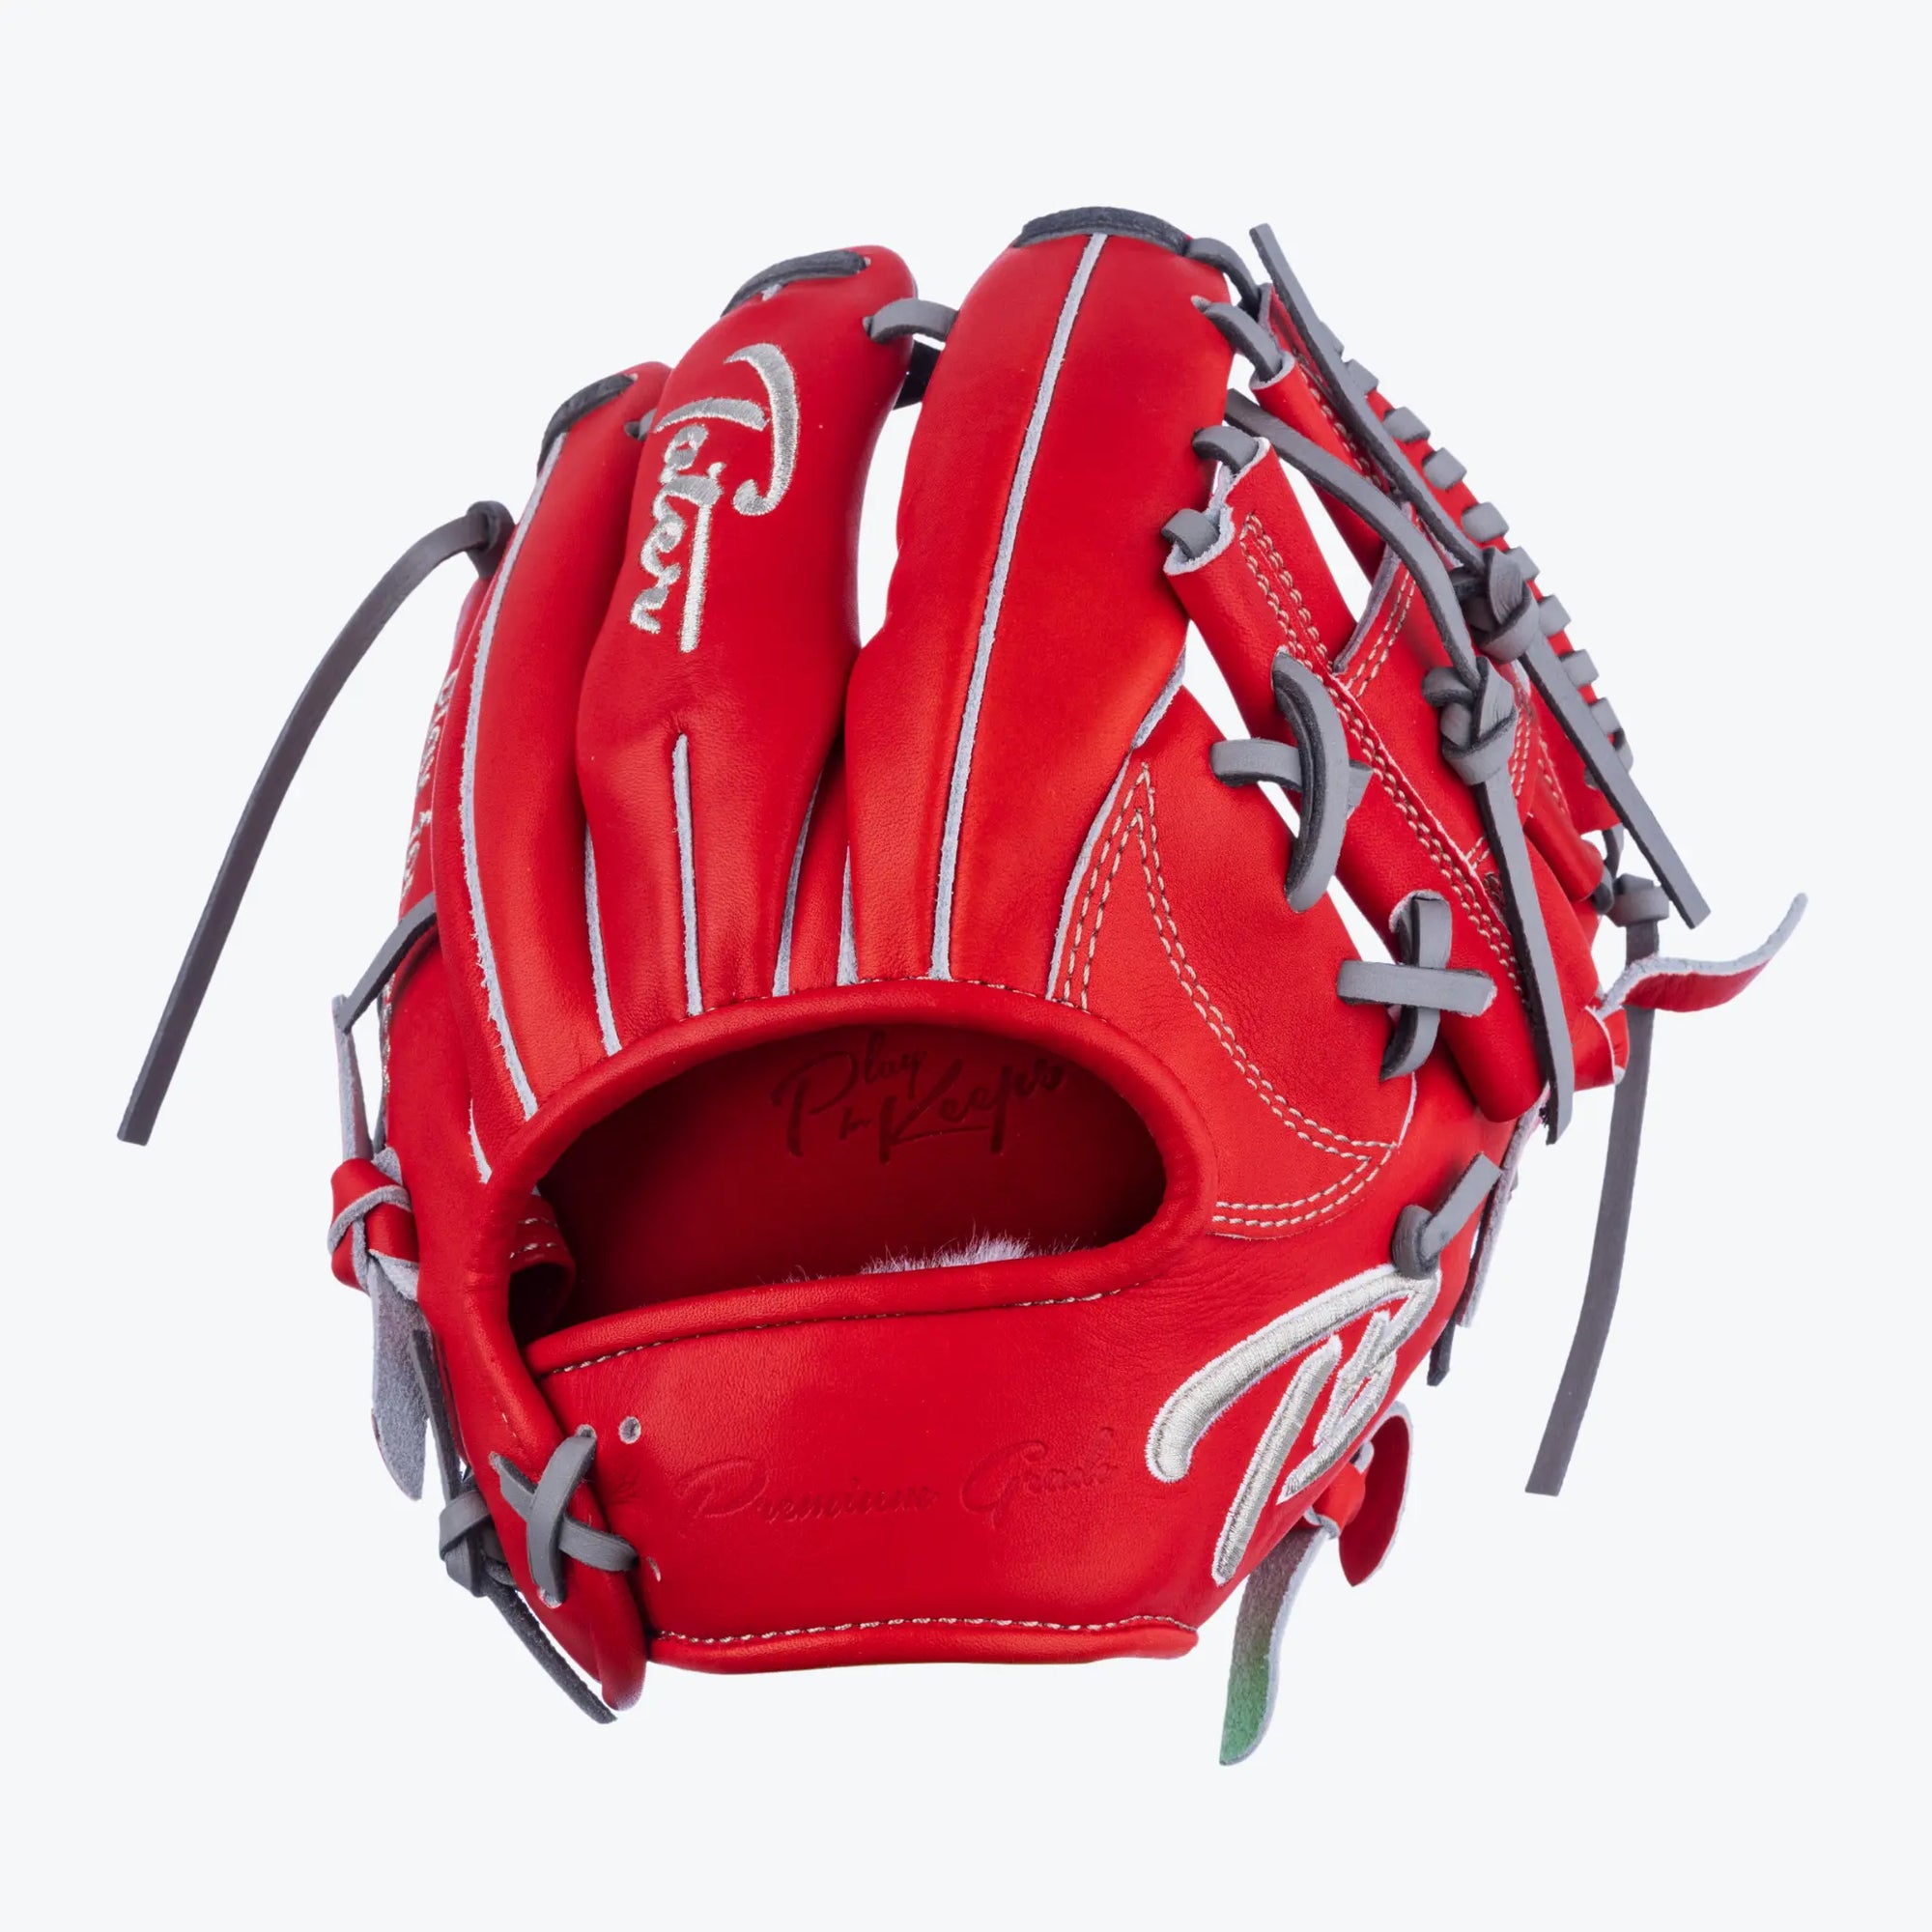 Unleash your fielding potential with Tater Baseball's vibrant red professional infield training glove. This 9.5-inch glove is meticulously crafted with premium materials, featuring gray lacing and signature branding. Perfect for athletes focusing on agility and precision in the infield.